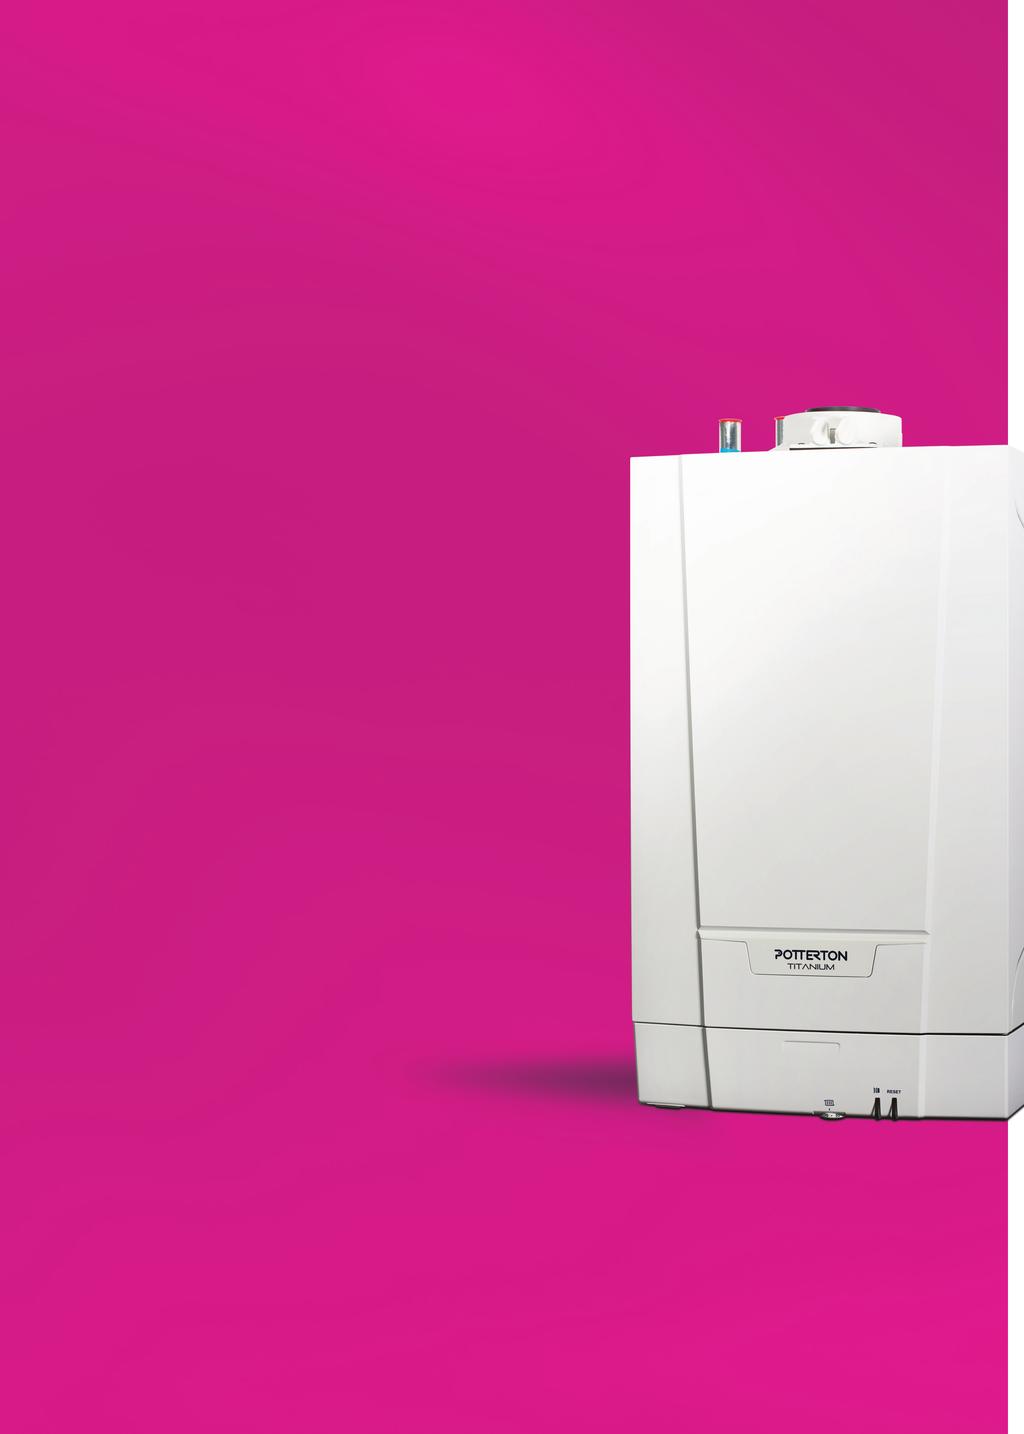 Potterton Titanium Heat The lightest boiler available on the UK market ** with no pump overrun or permanent live required.